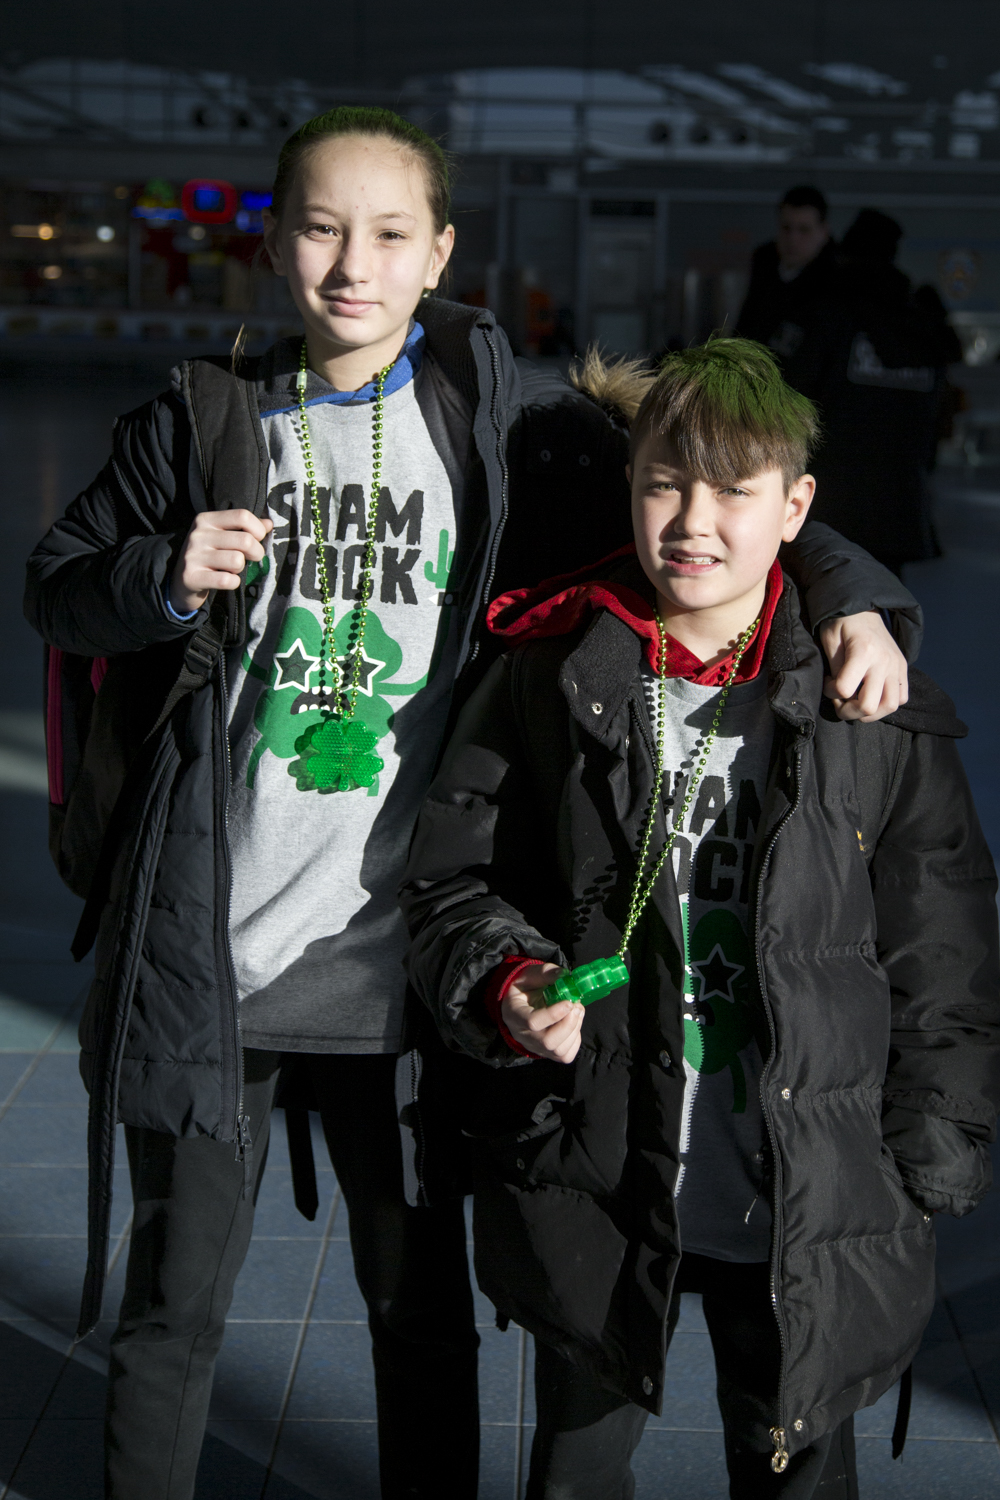  Caelyn Petri, 12, and Jacob Petri, 8, wait for the Staten Island Ferry to Manhattan on St. Patrick's Day. (Staten Island Advance/Shira Stoll) 